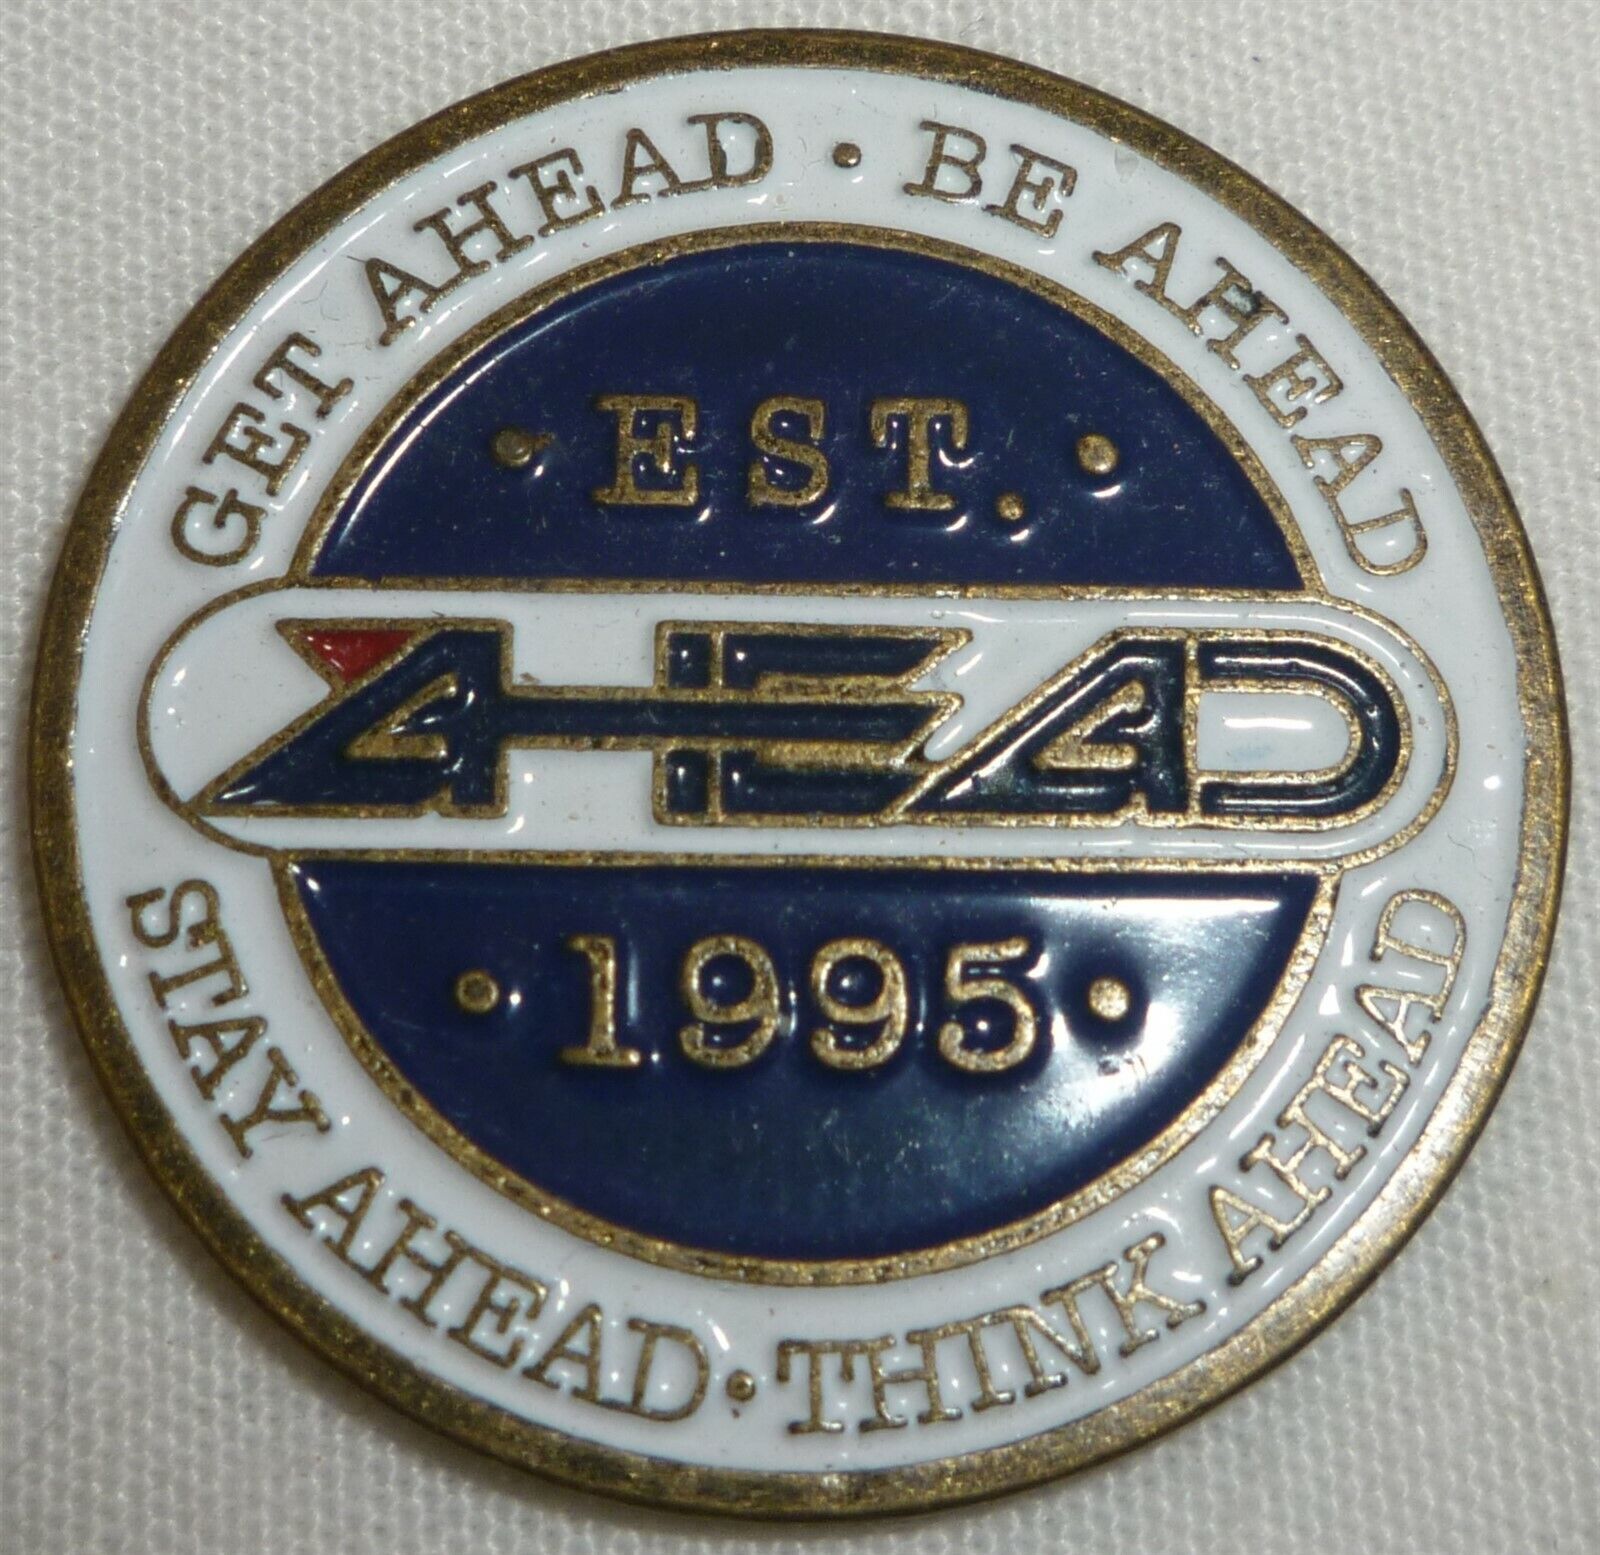 AHEAD GEAR MAGNETIC BALL MARKER COIN STAY AHEAD THINK AHEAD - $4.00